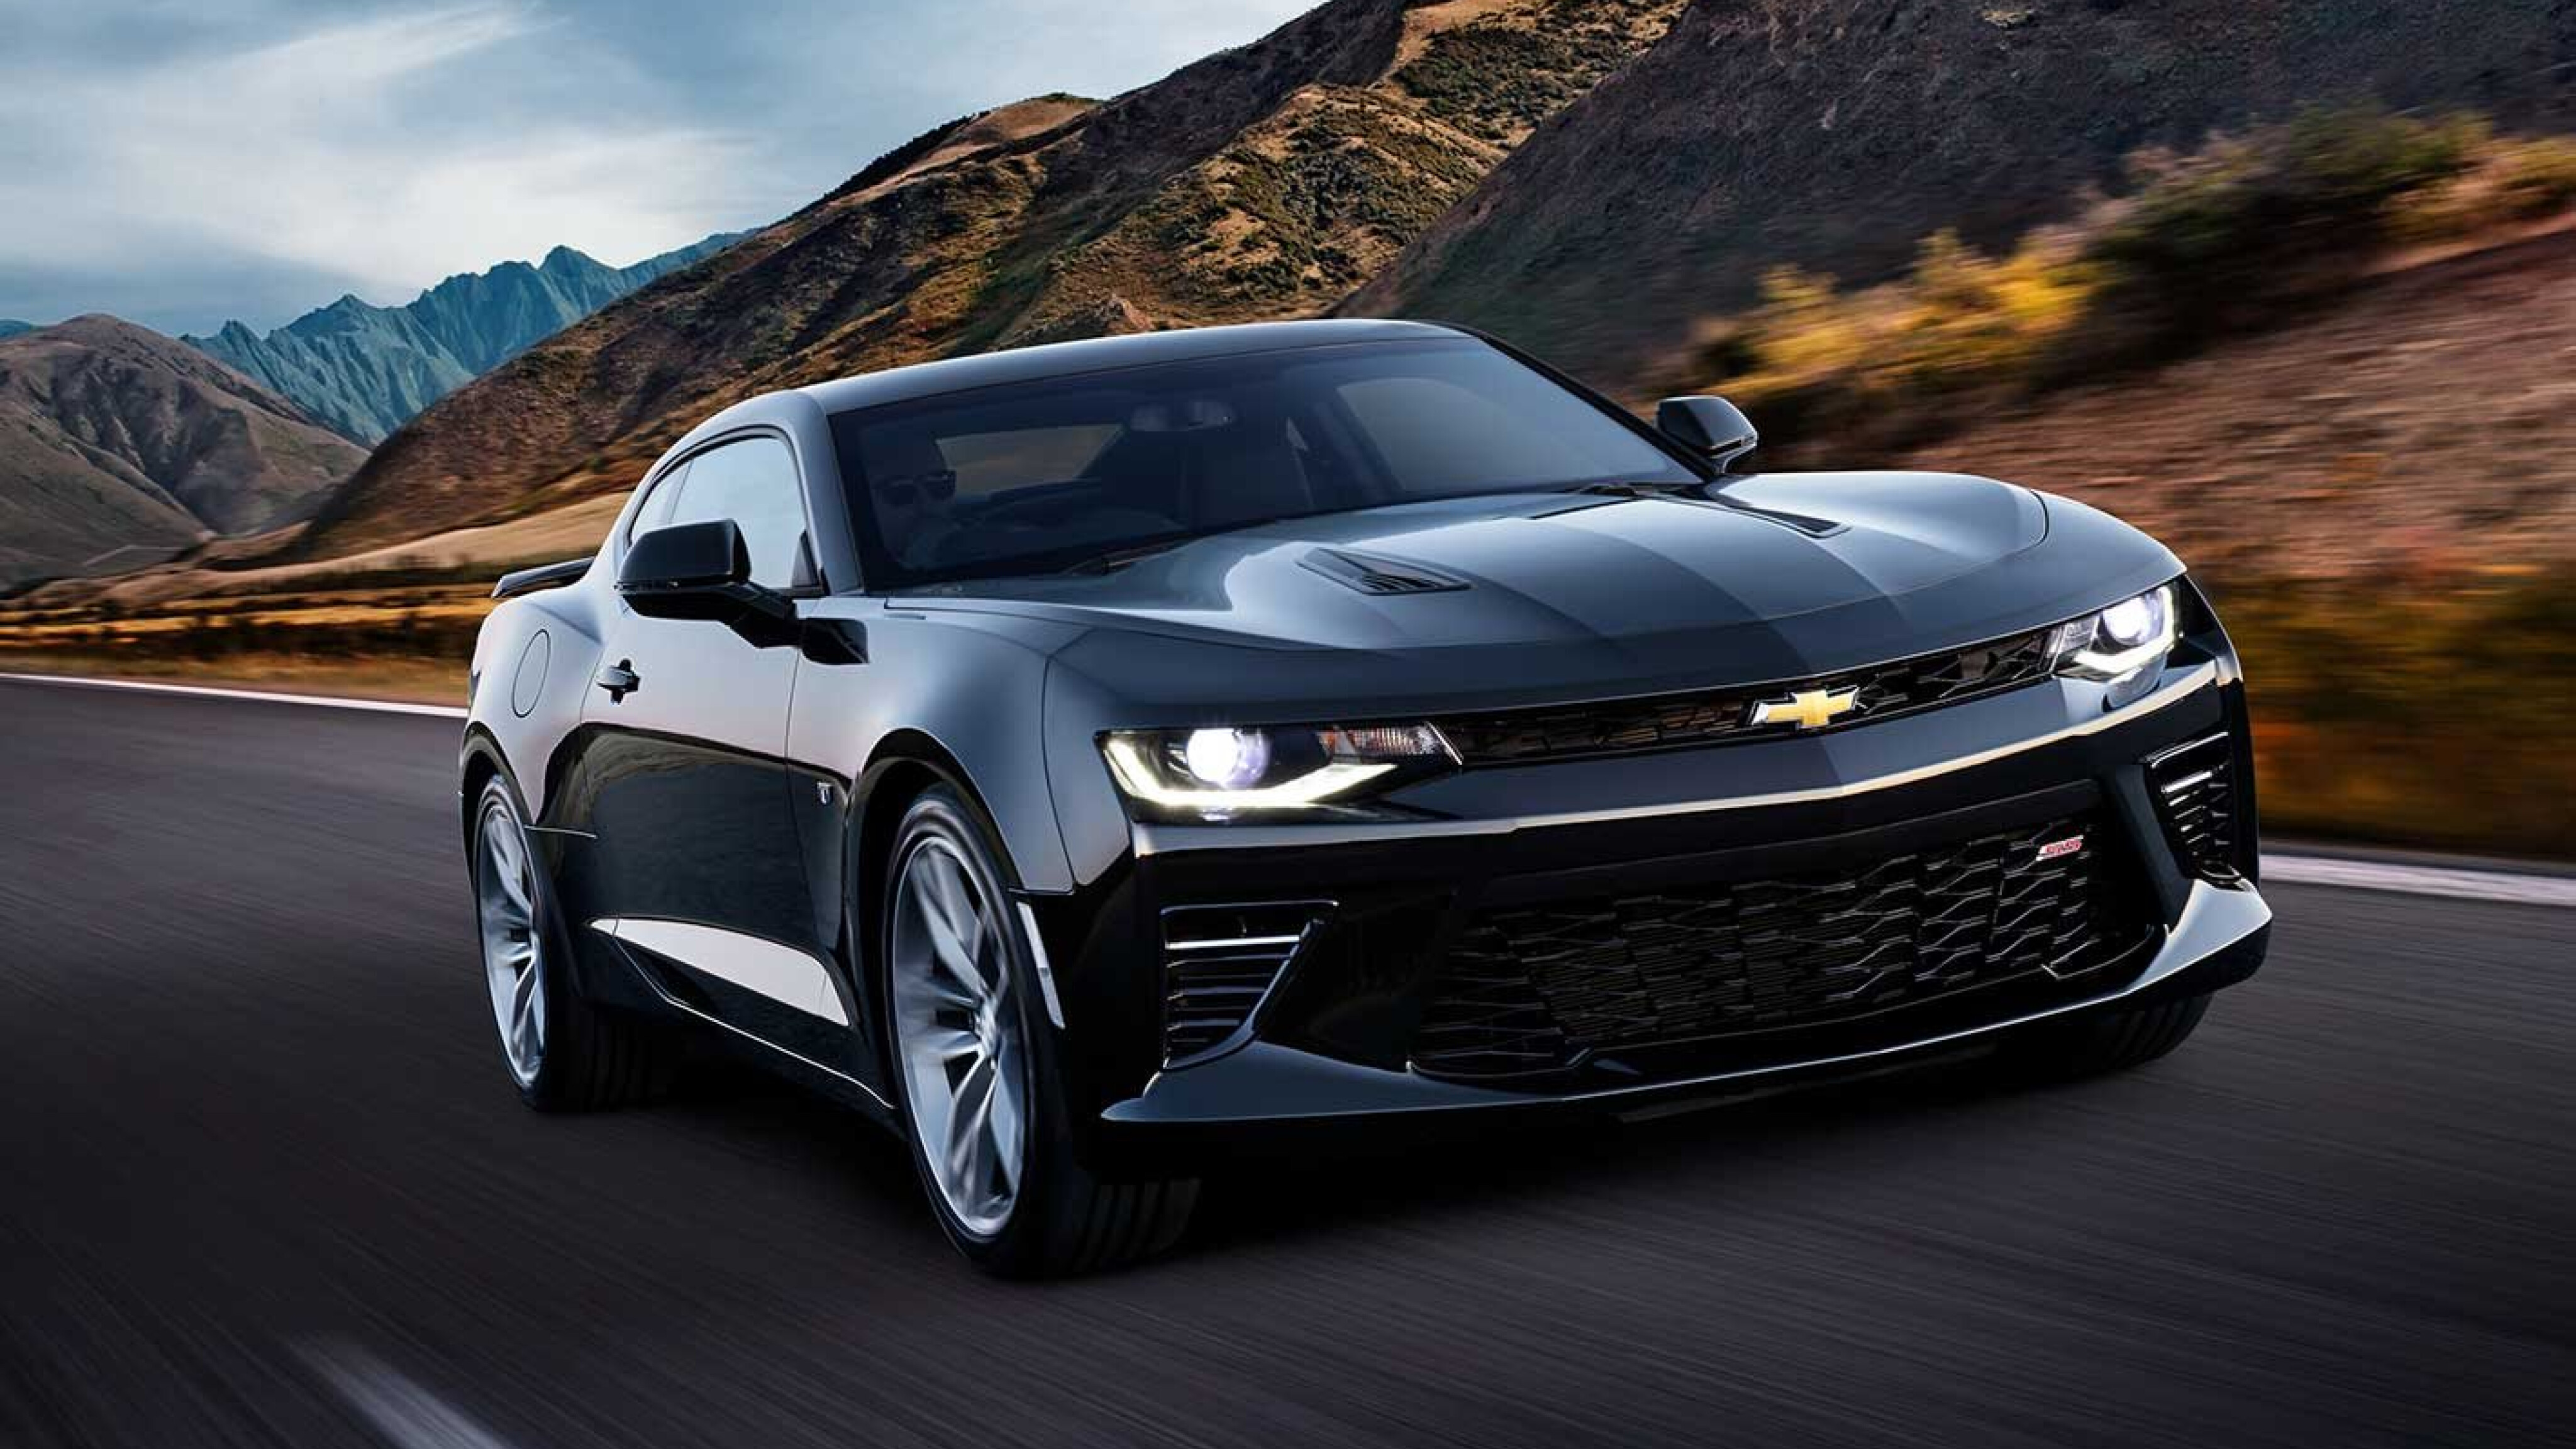 Chevrolet Camaro EV sedan takes shape: Would this be a suitable electric  replacement for the Holden Commodore SS? - Car News